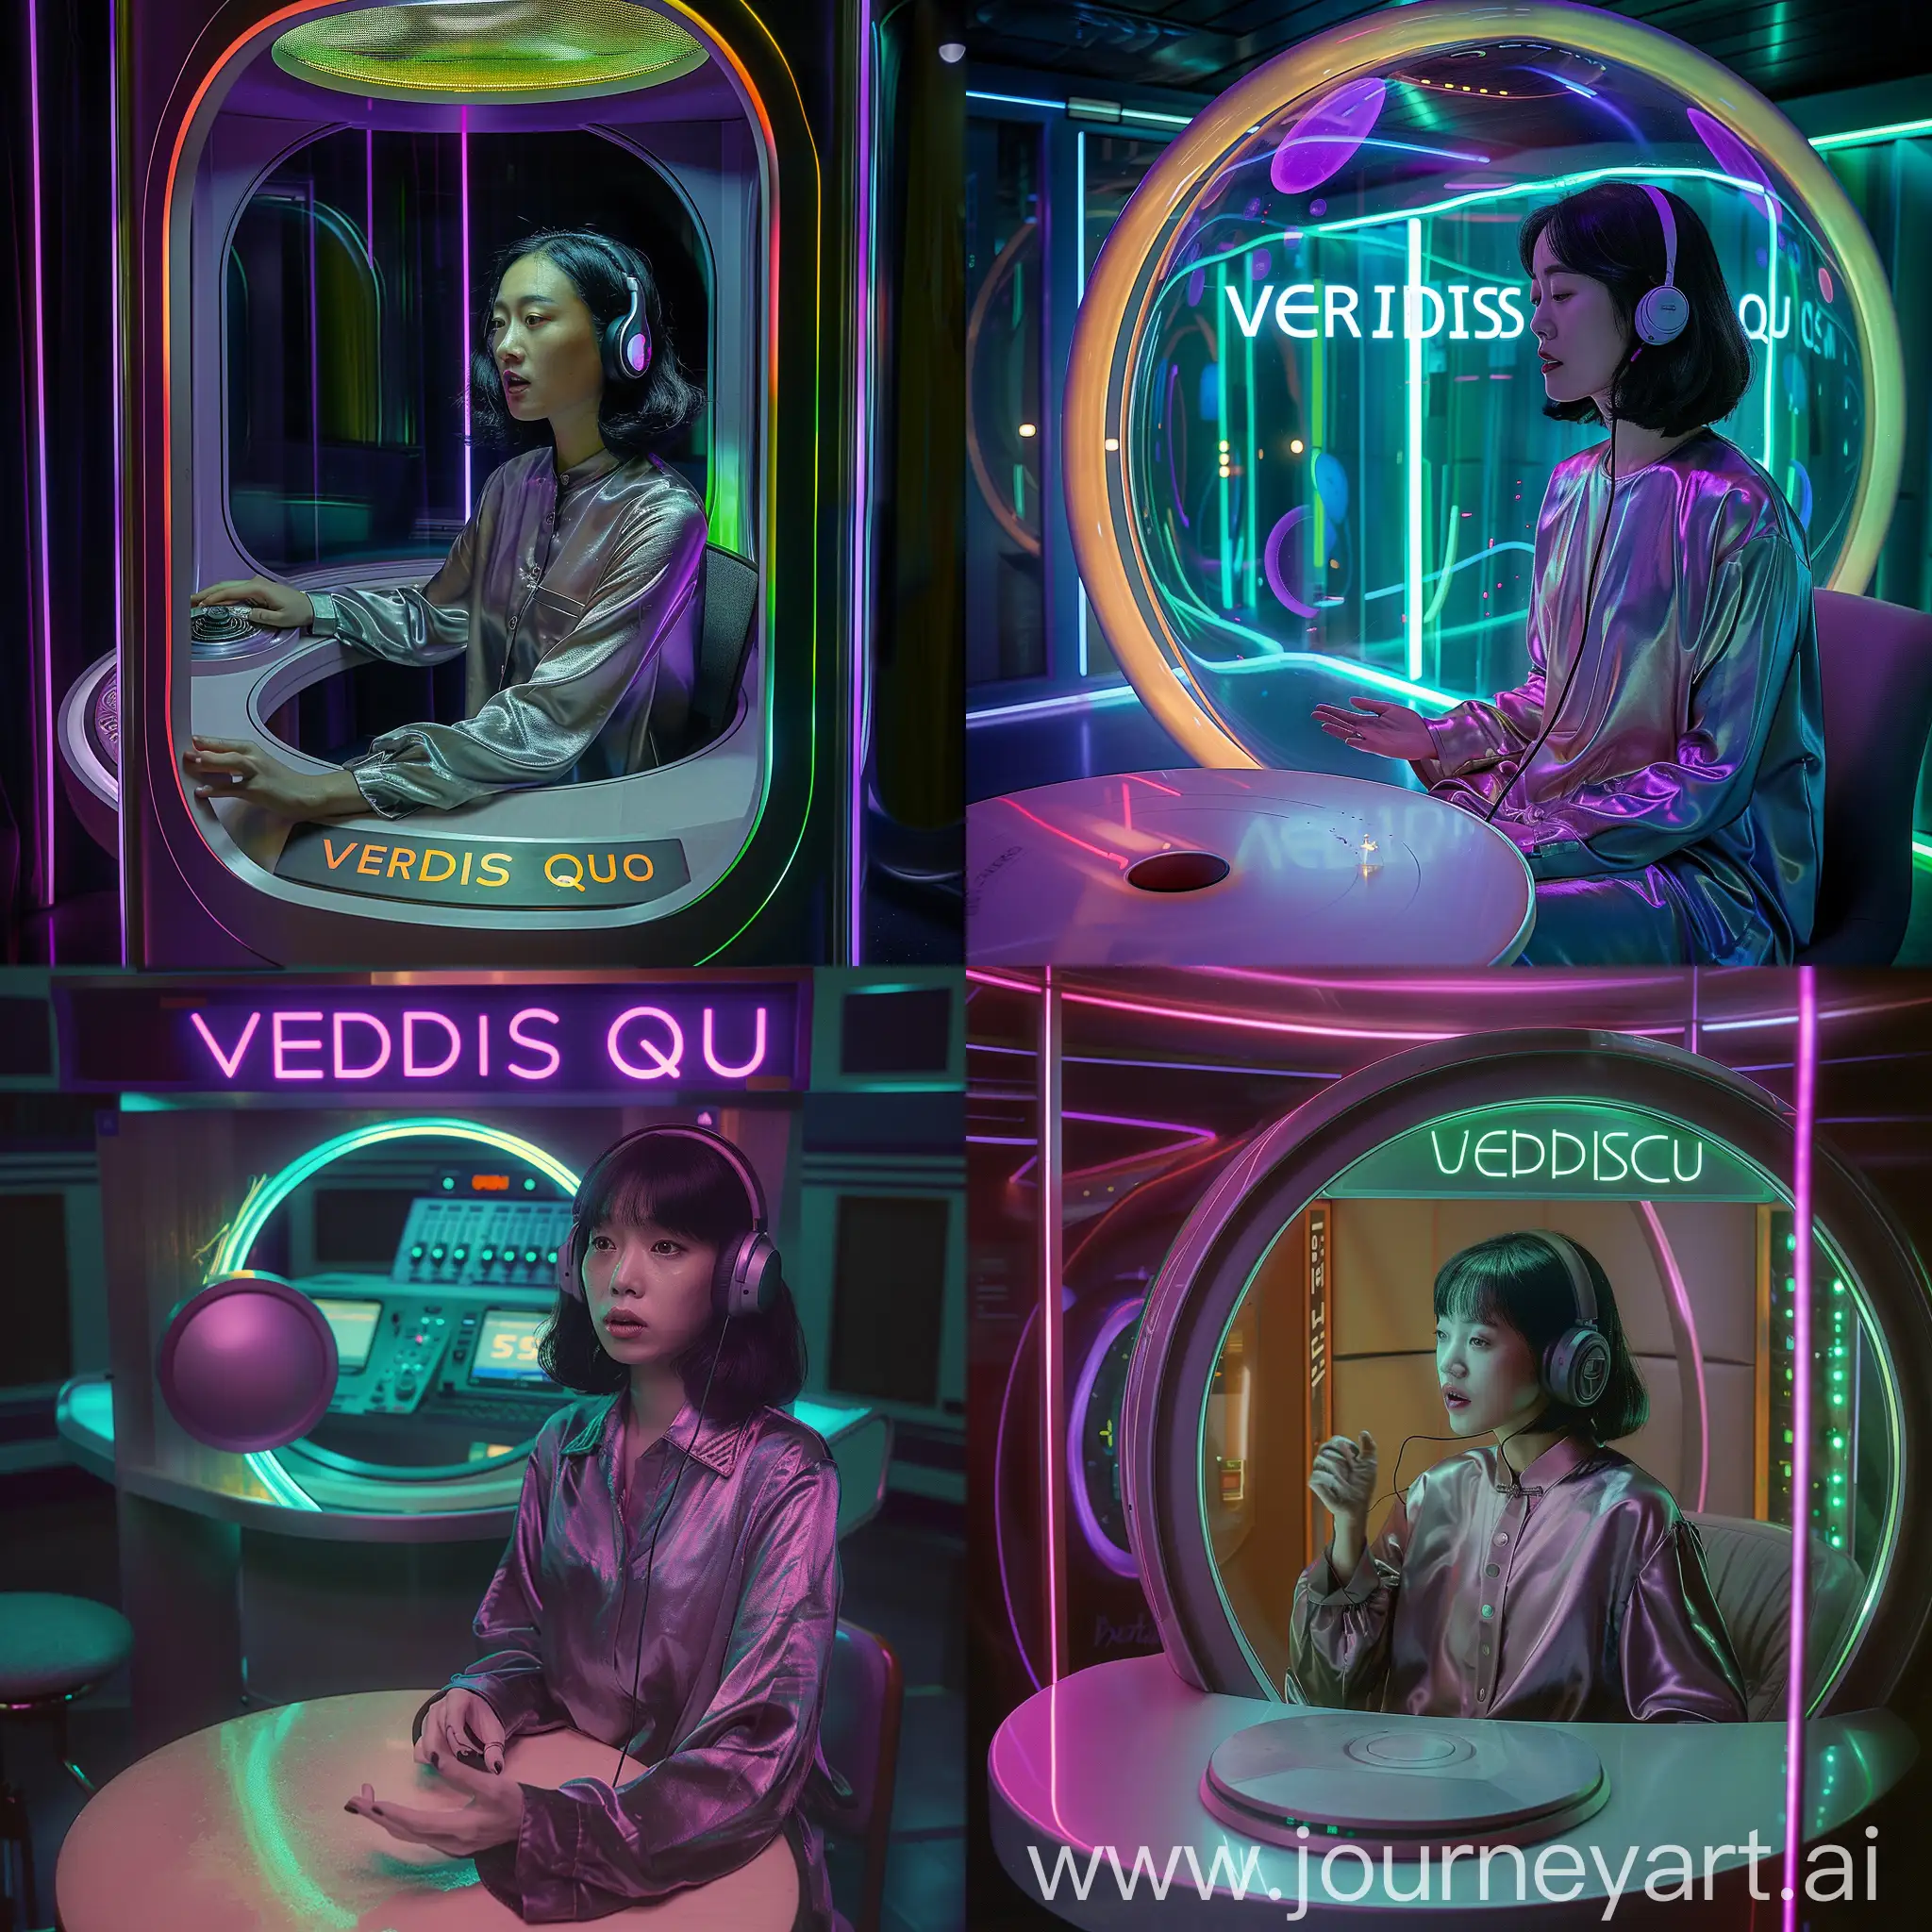 A beautiful modern radio station, a 40th age lady with blacck hair (presenter inside), looking lost. She i talking no one is there inside. It's quite dark with some vibrant colors lie purple and green led lights inside, The radio emisison called Veridis Quo. a round table and she is sitting on chair there, with healphone on her head. She wears silky greyish shirt. It feels like thriller film. 35mm film. Reference to Parasite drama thriller  Korean film